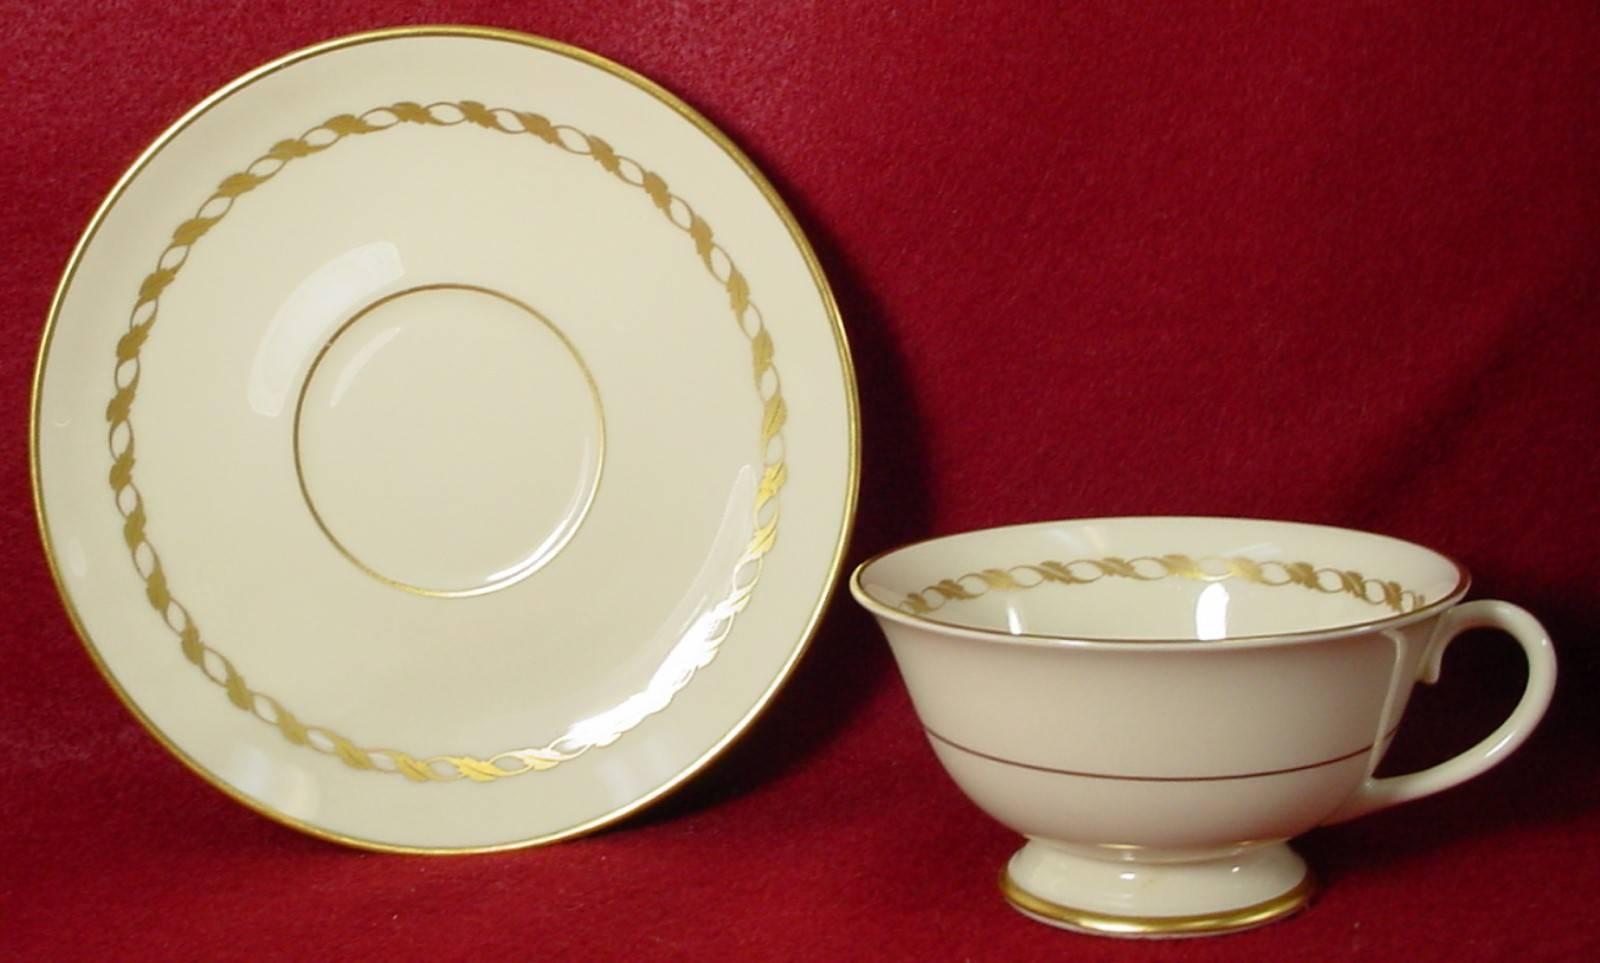 In great condition with minimal use.

Production dates: 1941-1962.

Includes 12 each cup, saucer, dinner plate, salad plate and bread plate.

U.S.A.

Inner gold rope band (verge).

Gold trim.